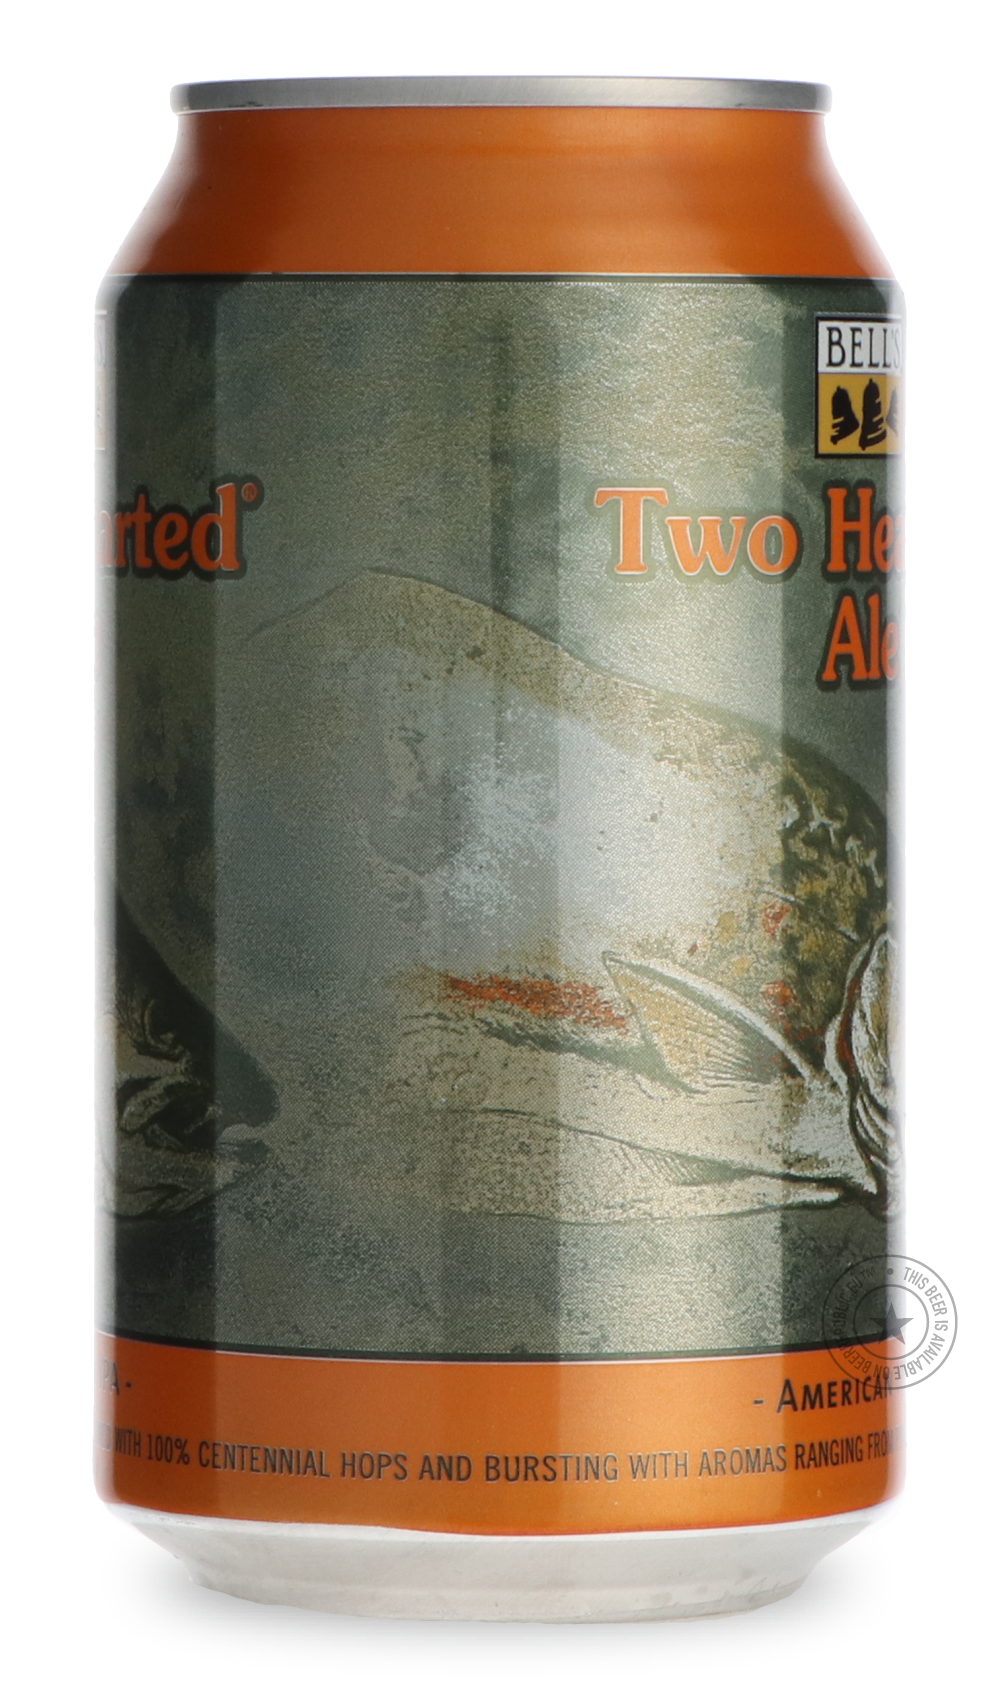 -Bell's- Two Hearted IPA-IPA- Only @ Beer Republic - The best online beer store for American & Canadian craft beer - Buy beer online from the USA and Canada - Bier online kopen - Amerikaans bier kopen - Craft beer store - Craft beer kopen - Amerikanisch bier kaufen - Bier online kaufen - Acheter biere online - IPA - Stout - Porter - New England IPA - Hazy IPA - Imperial Stout - Barrel Aged - Barrel Aged Imperial Stout - Brown - Dark beer - Blond - Blonde - Pilsner - Lager - Wheat - Weizen - Amber - Barley W